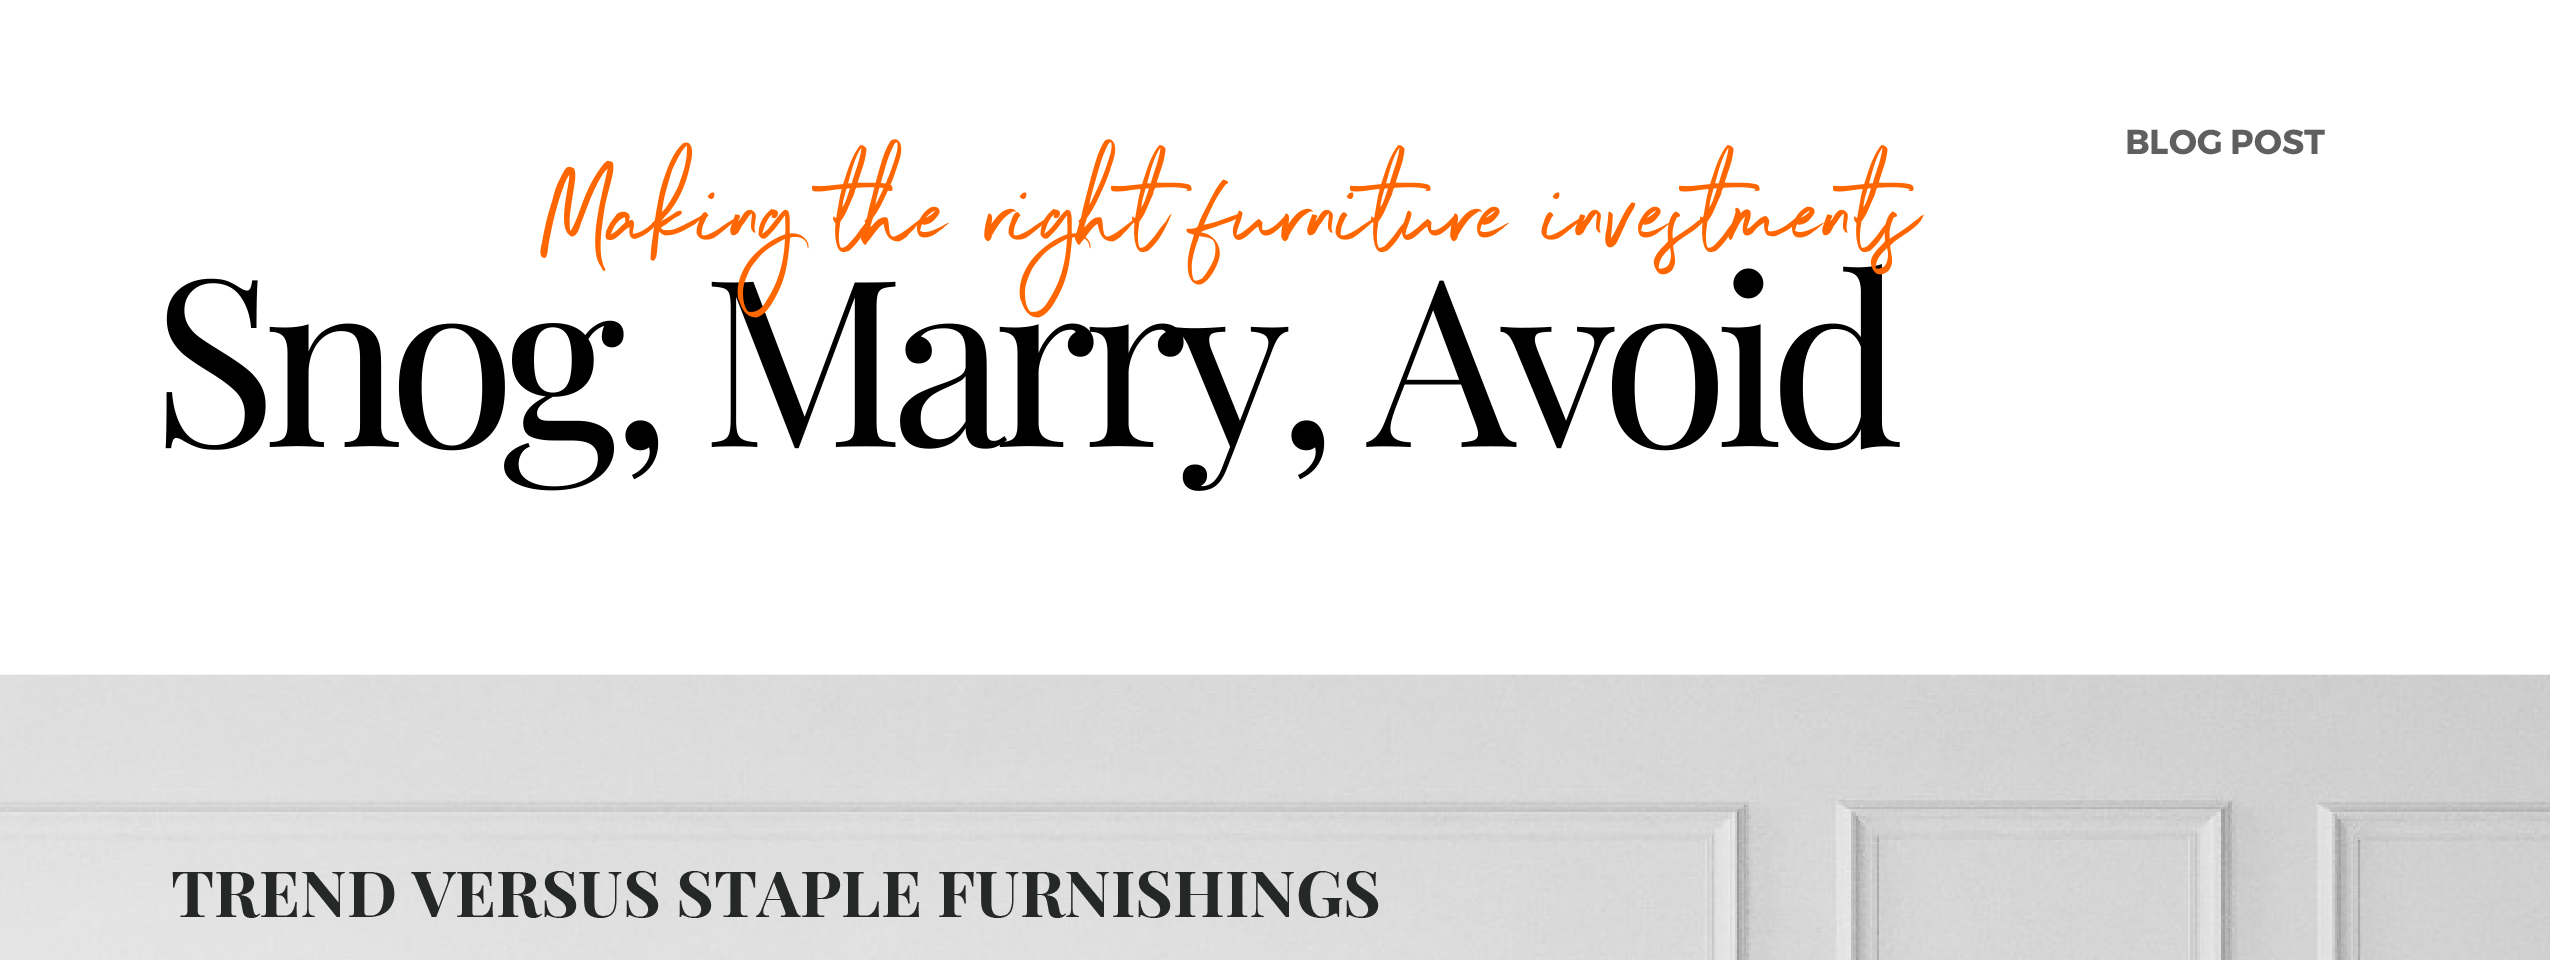 Blog Post - Snog, Marry, Avoid - Making the right furniture